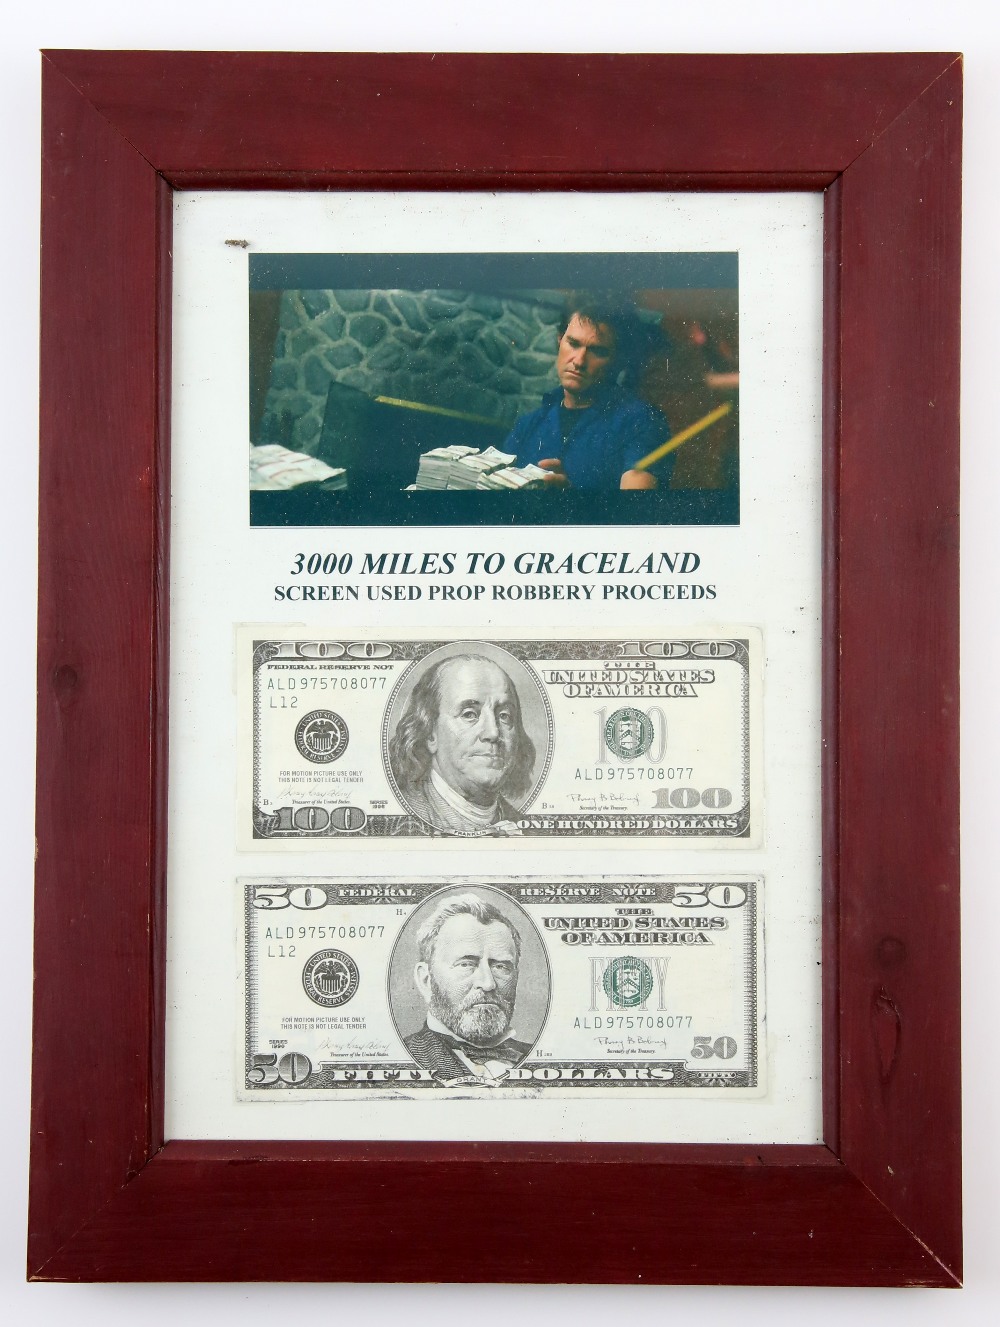 3000 Miles to Graceland (2001) - Screen used robbery currency proceeds from the movie starring